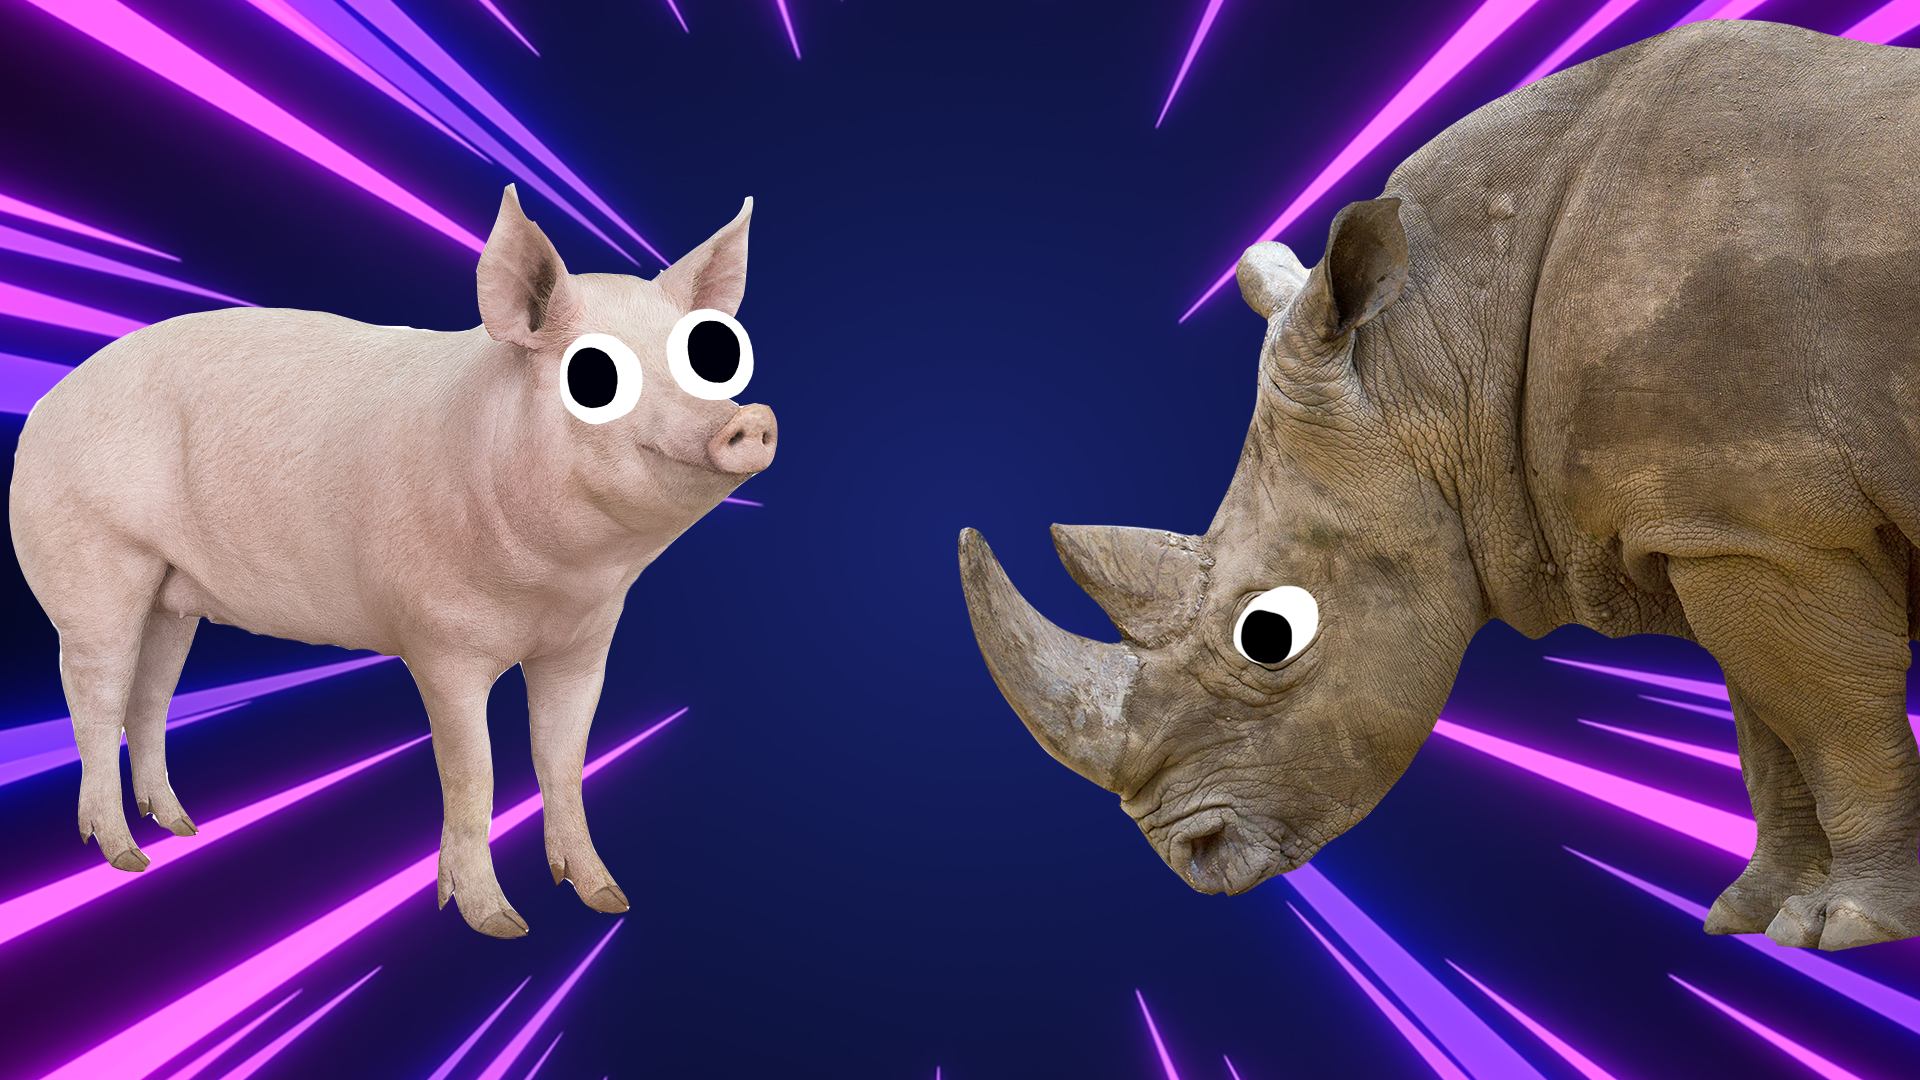 A pig and a rhino on a laser background